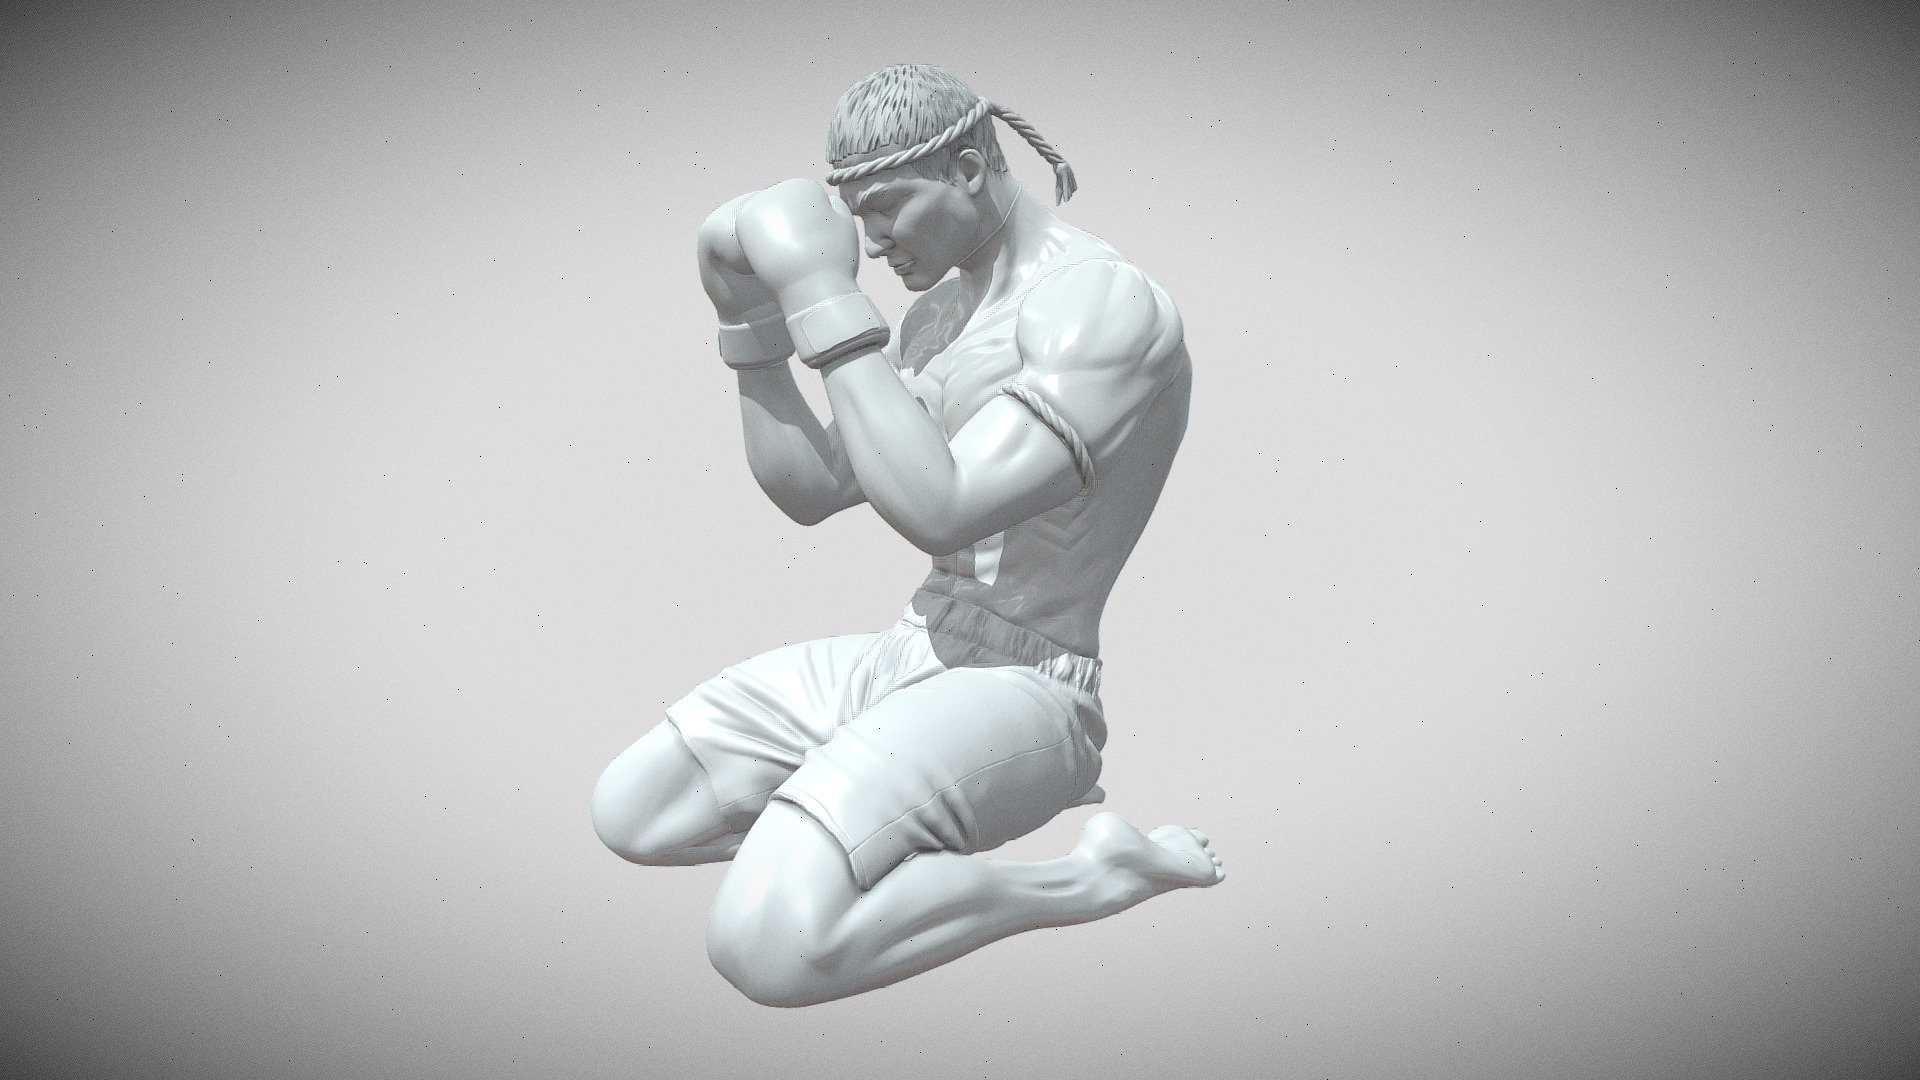 For ease of printing and assembly, the fighter is divided into parts: head, torso, arms, gloves, hips and legs.
the overall size is 120mm, but you can change it to your liking.

there is also an obj file, where it is divided into parts, but all the parts are together in one file. And an additional stl file, where the fighter is completely combined, if you want to print it as a single element 3d model